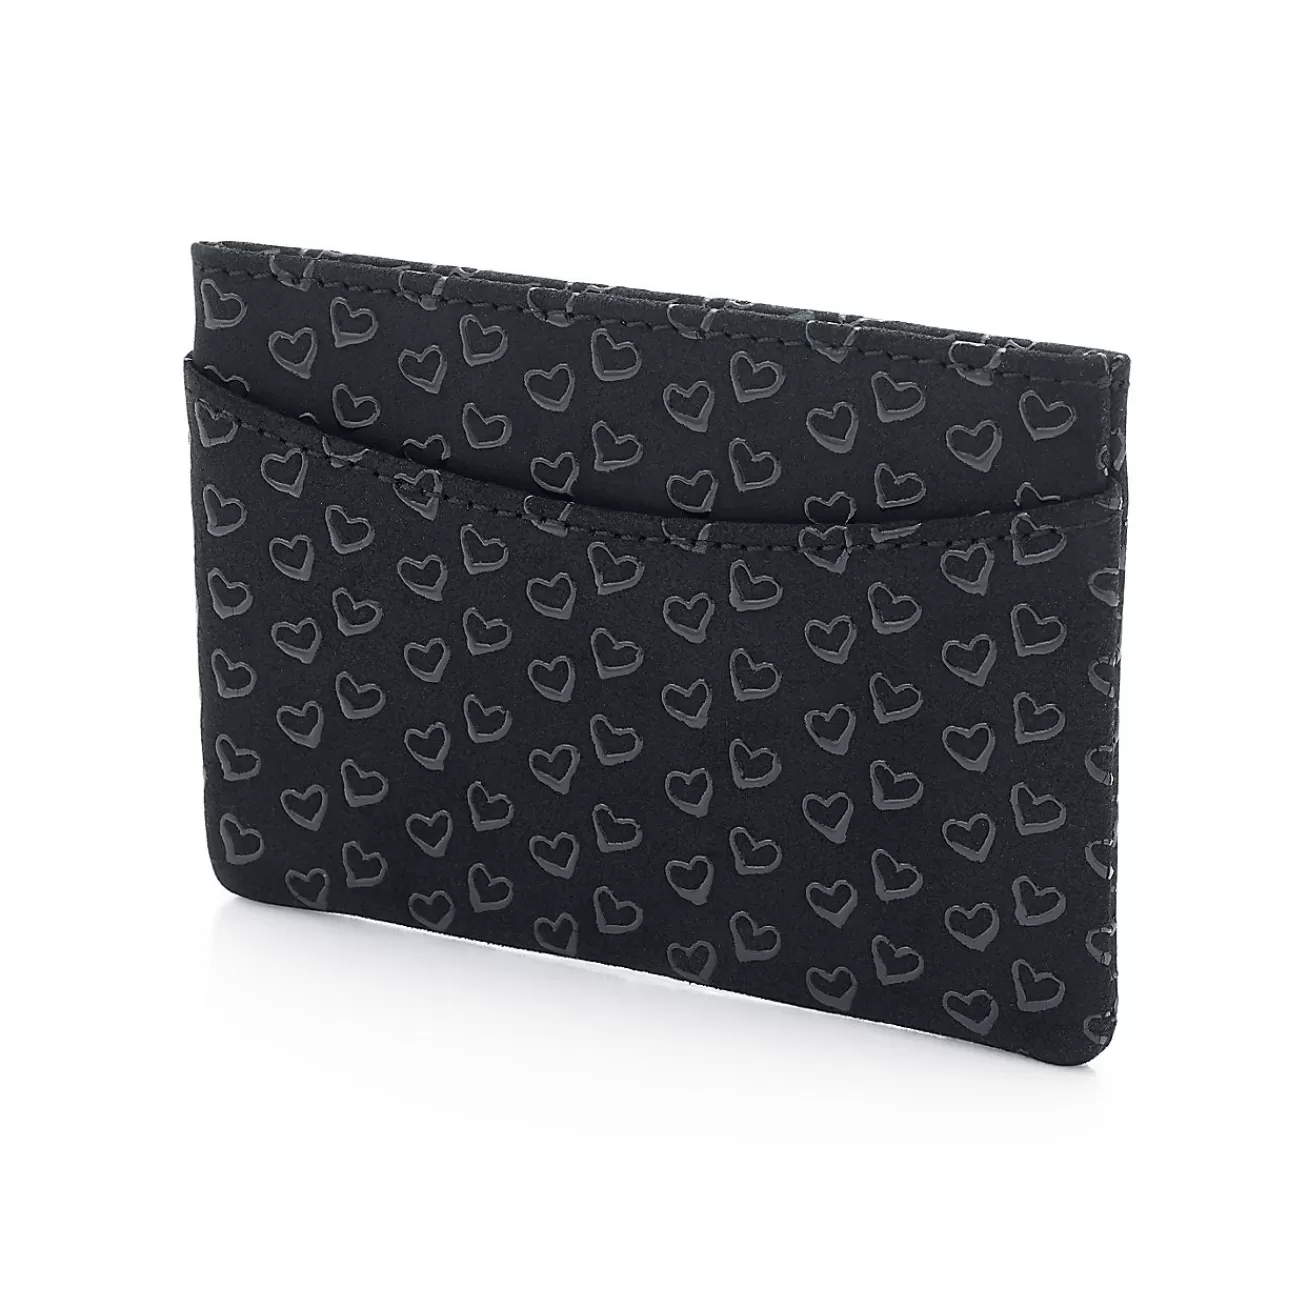 Tiffany & Co. Elsa Peretti® card case in black leather with lacquered Open Hearts. | ^Women Small Leather Goods | Women's Accessories